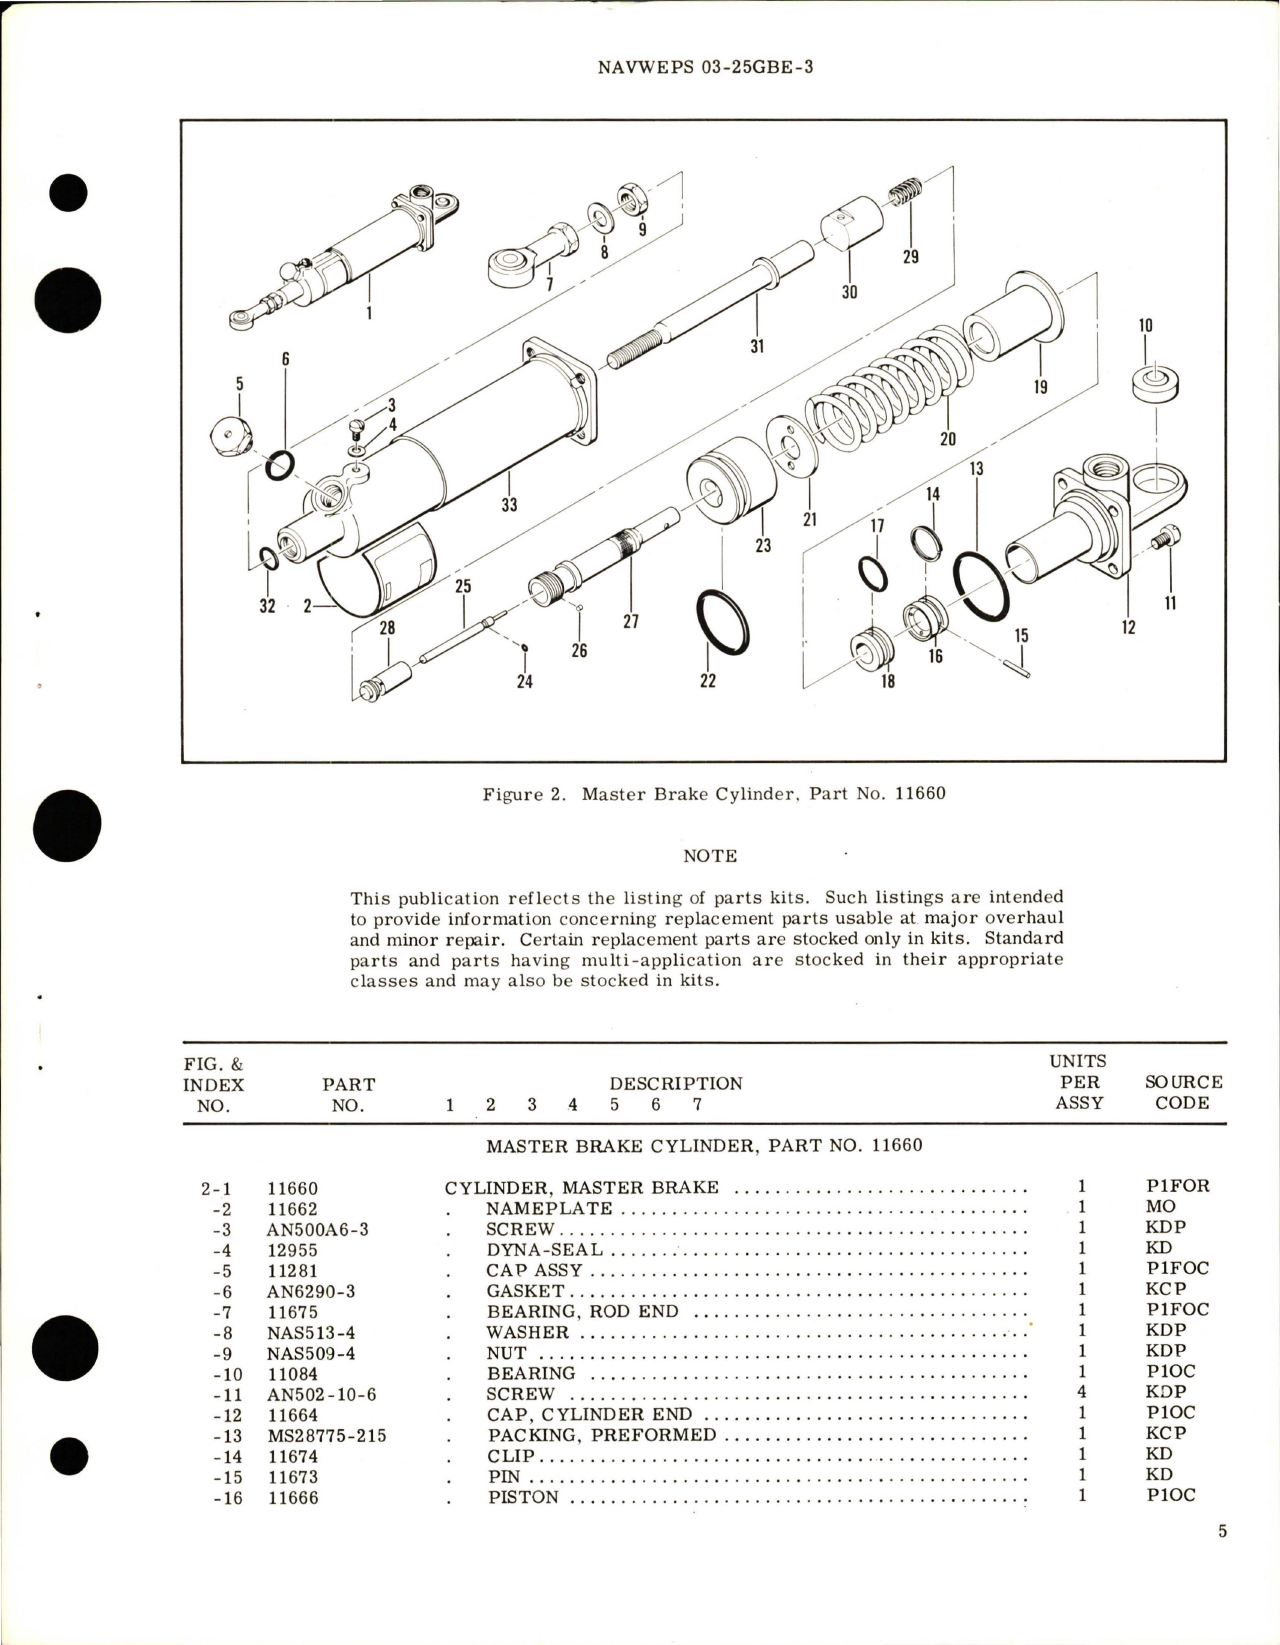 Sample page 5 from AirCorps Library document: Overhaul Instructions with Parts Breakdown for Master Brake Cylinder - Part 11660